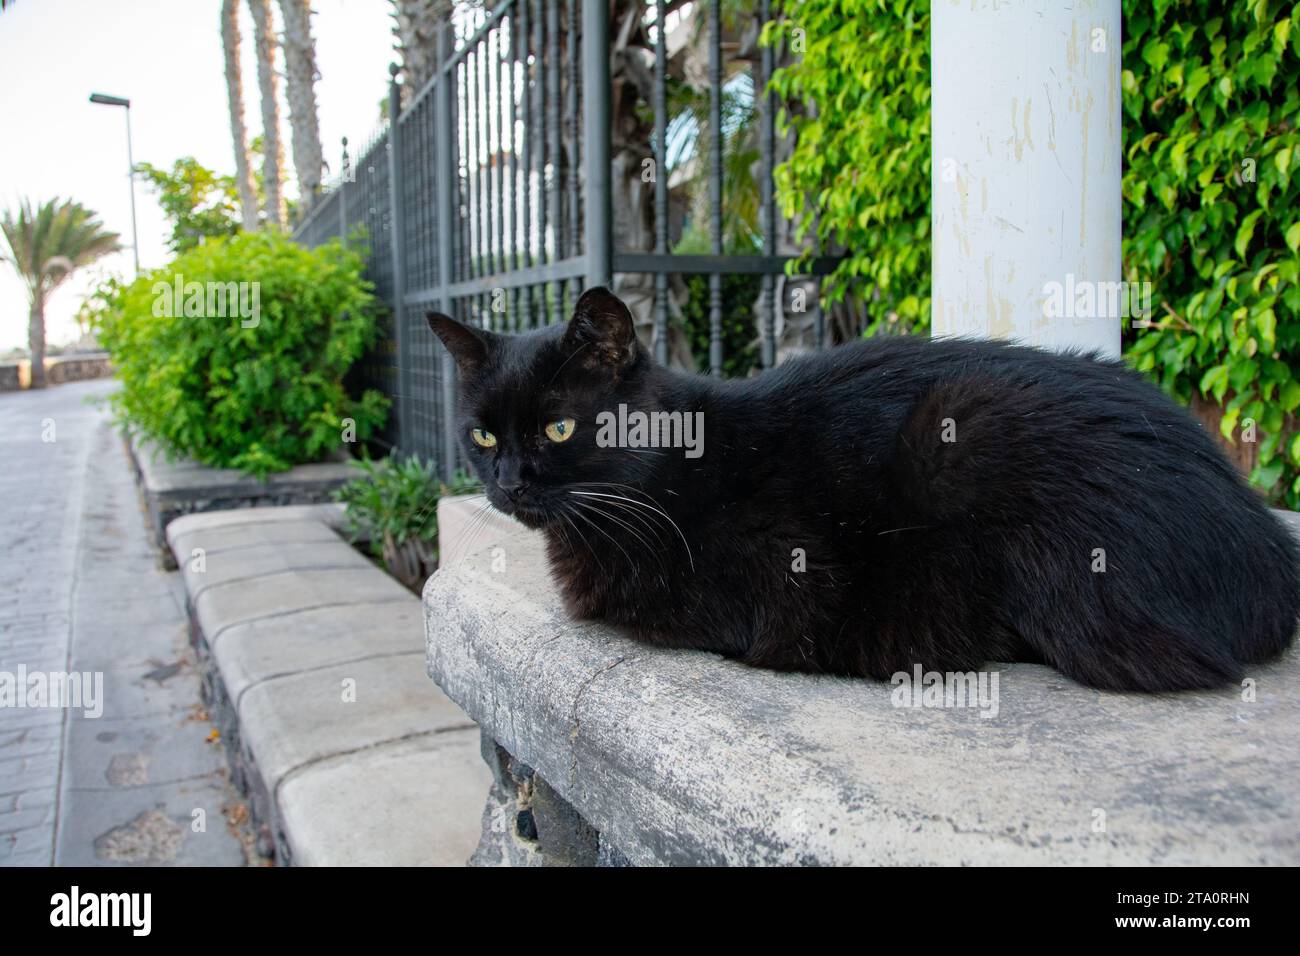 A wild black fluffy street cat on a wall, on the Canary Island of Gran Canaria in Spain Stock Photo